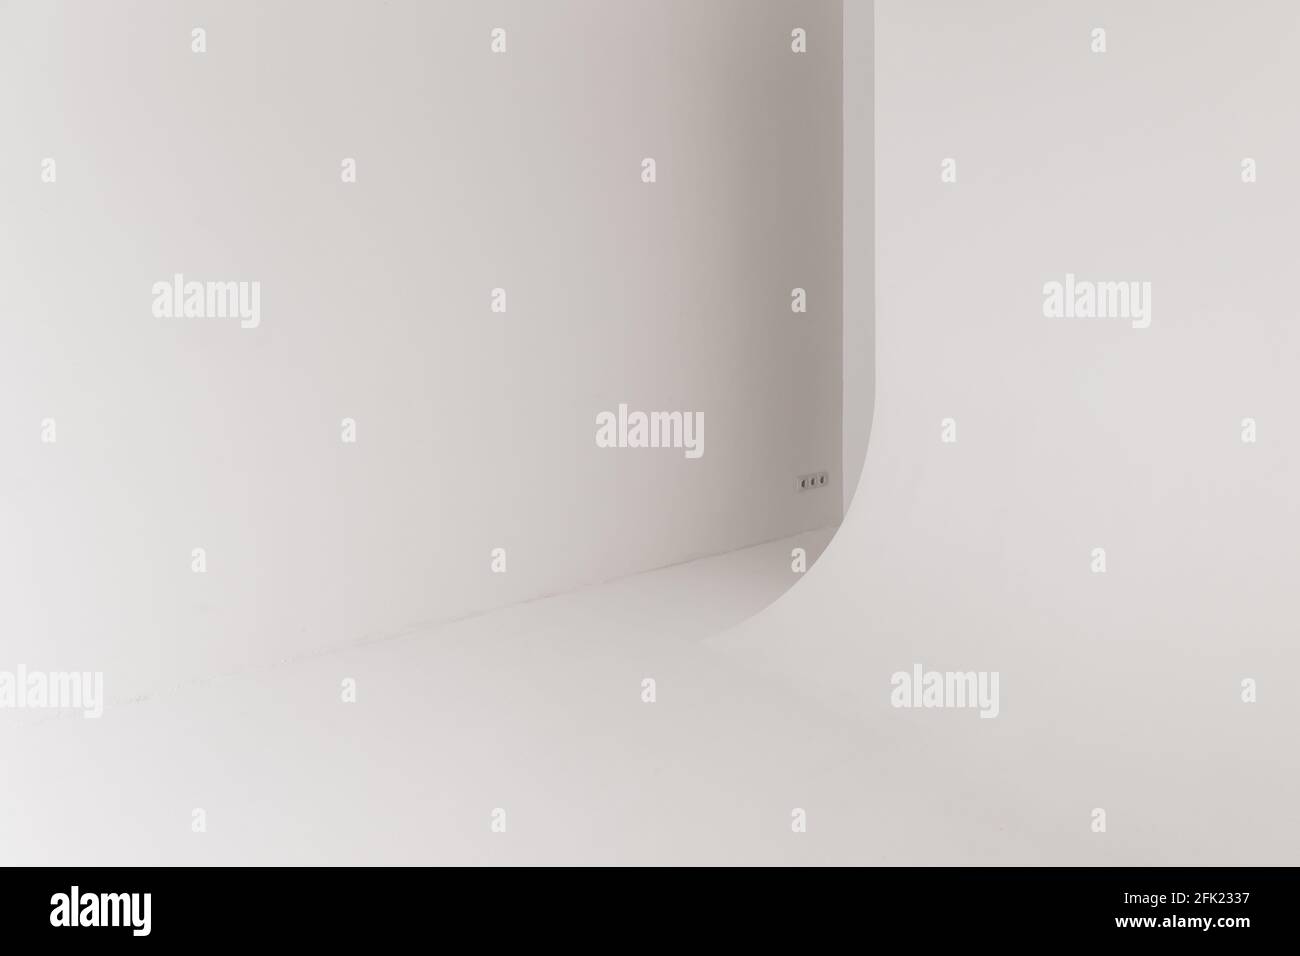 Abstract white photo studio interior background, empty blank cyclorama structure with a smooth transition between horizontal and vertical planes Stock Photo